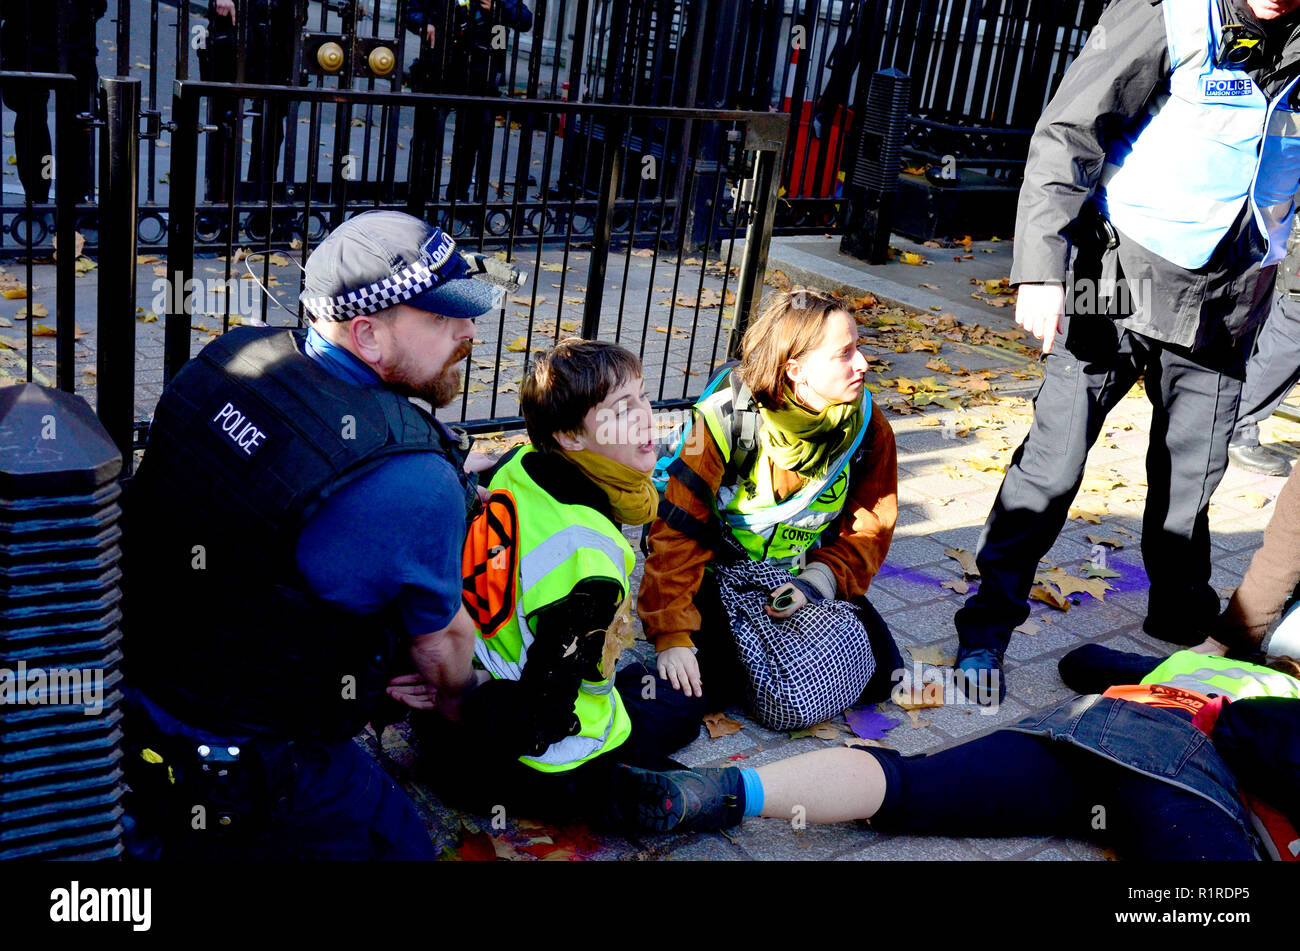 London, UK.  14th November. Several people are arrested as Environmental campaigners protest at the gates of Downing Street before a crucial cabinet meeting to discuss Brexit Credit: PjrFoto/Alamy Live News Stock Photo